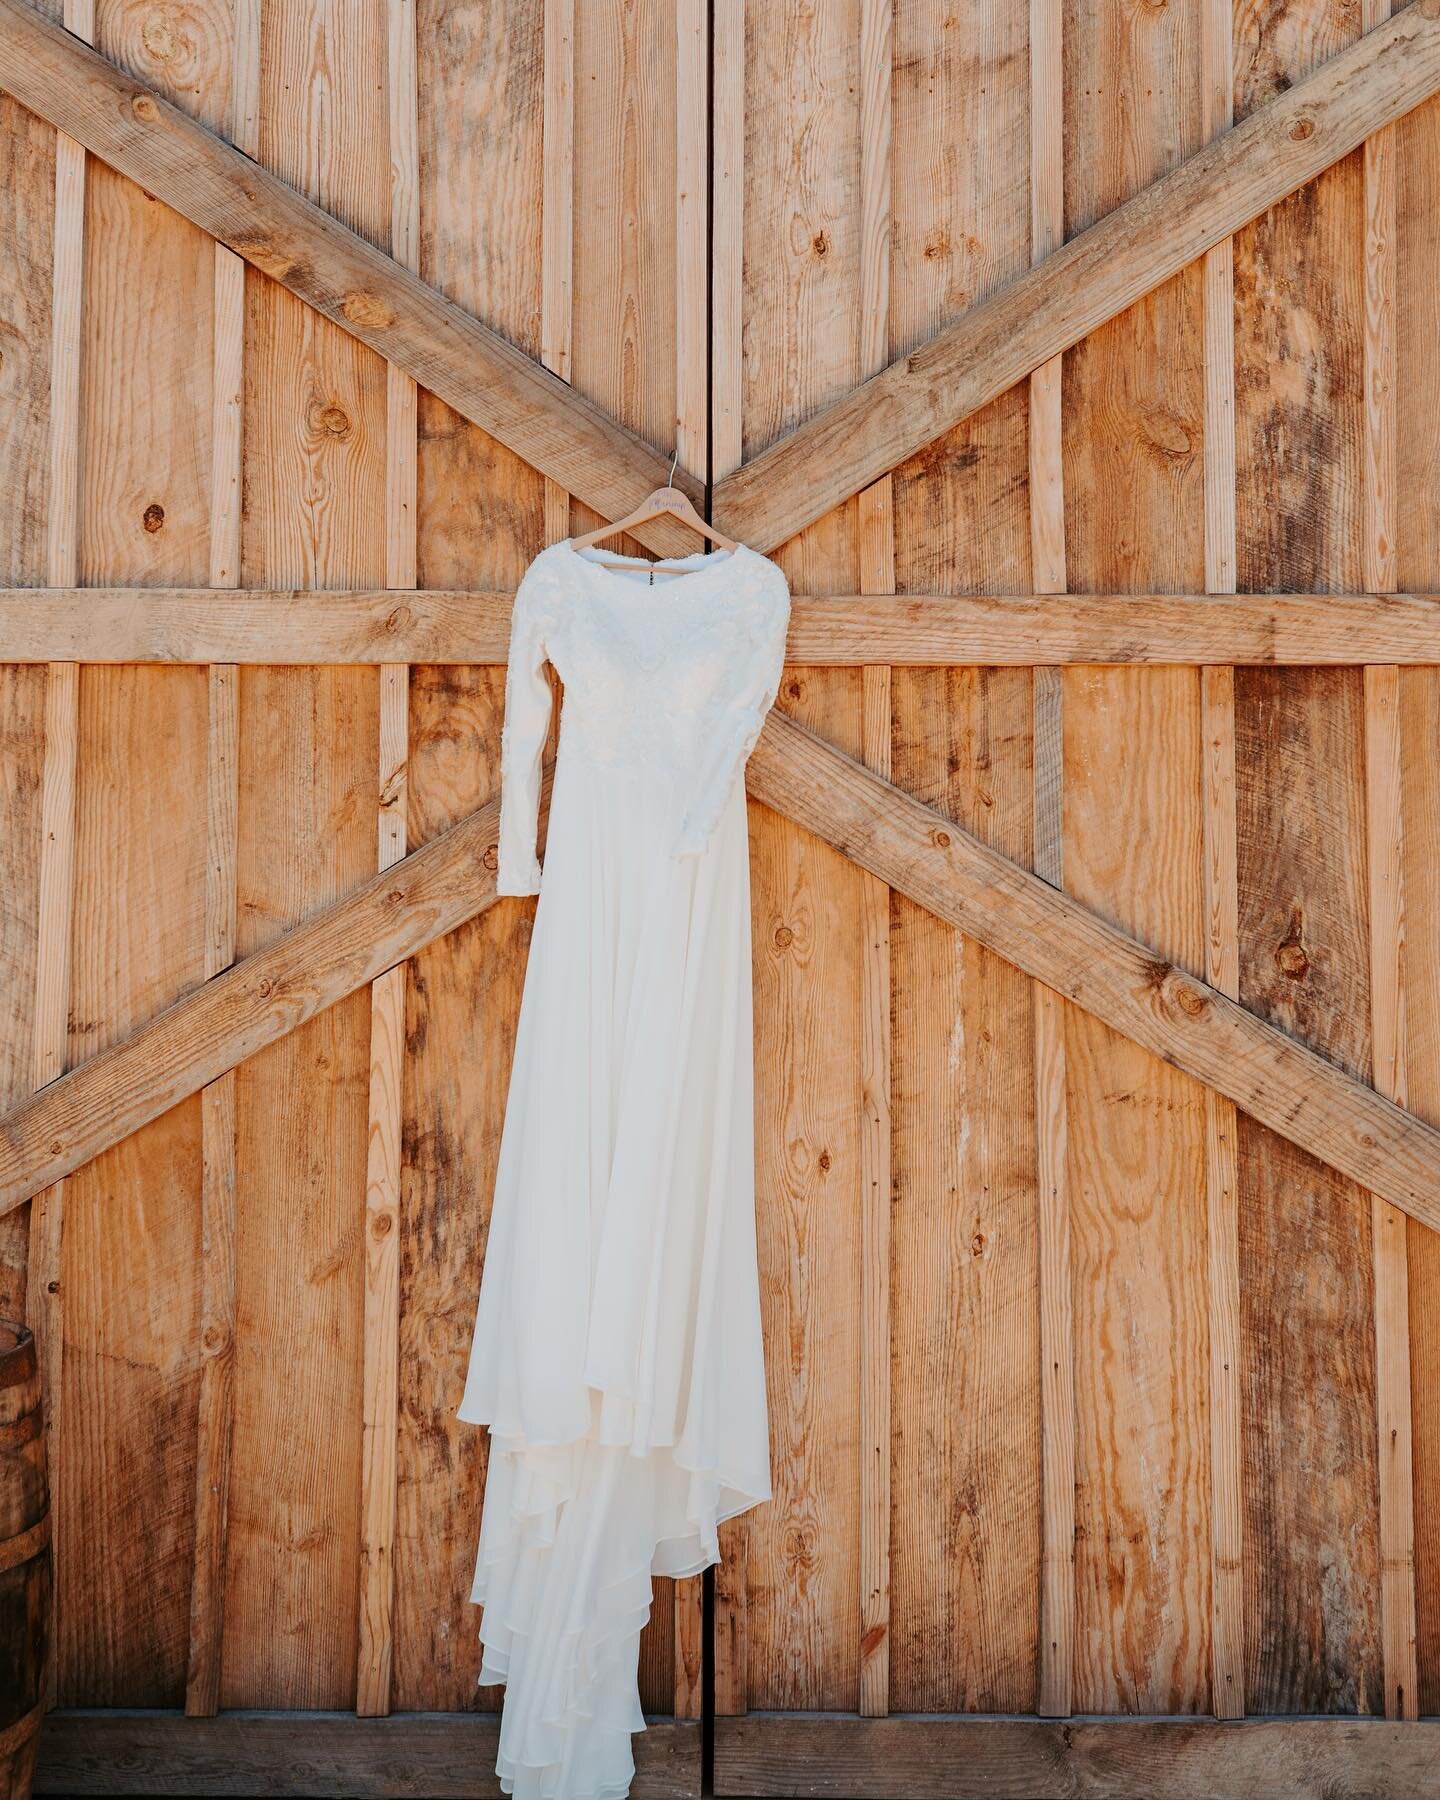 Elegance in every stitch. 

#tennessee #tennesseephotographer #tennesseephotography #wedding #weddingphotography #weddingphotographer #weddingdress #easttennessee #knox #knoxville #photo #photography #photographer